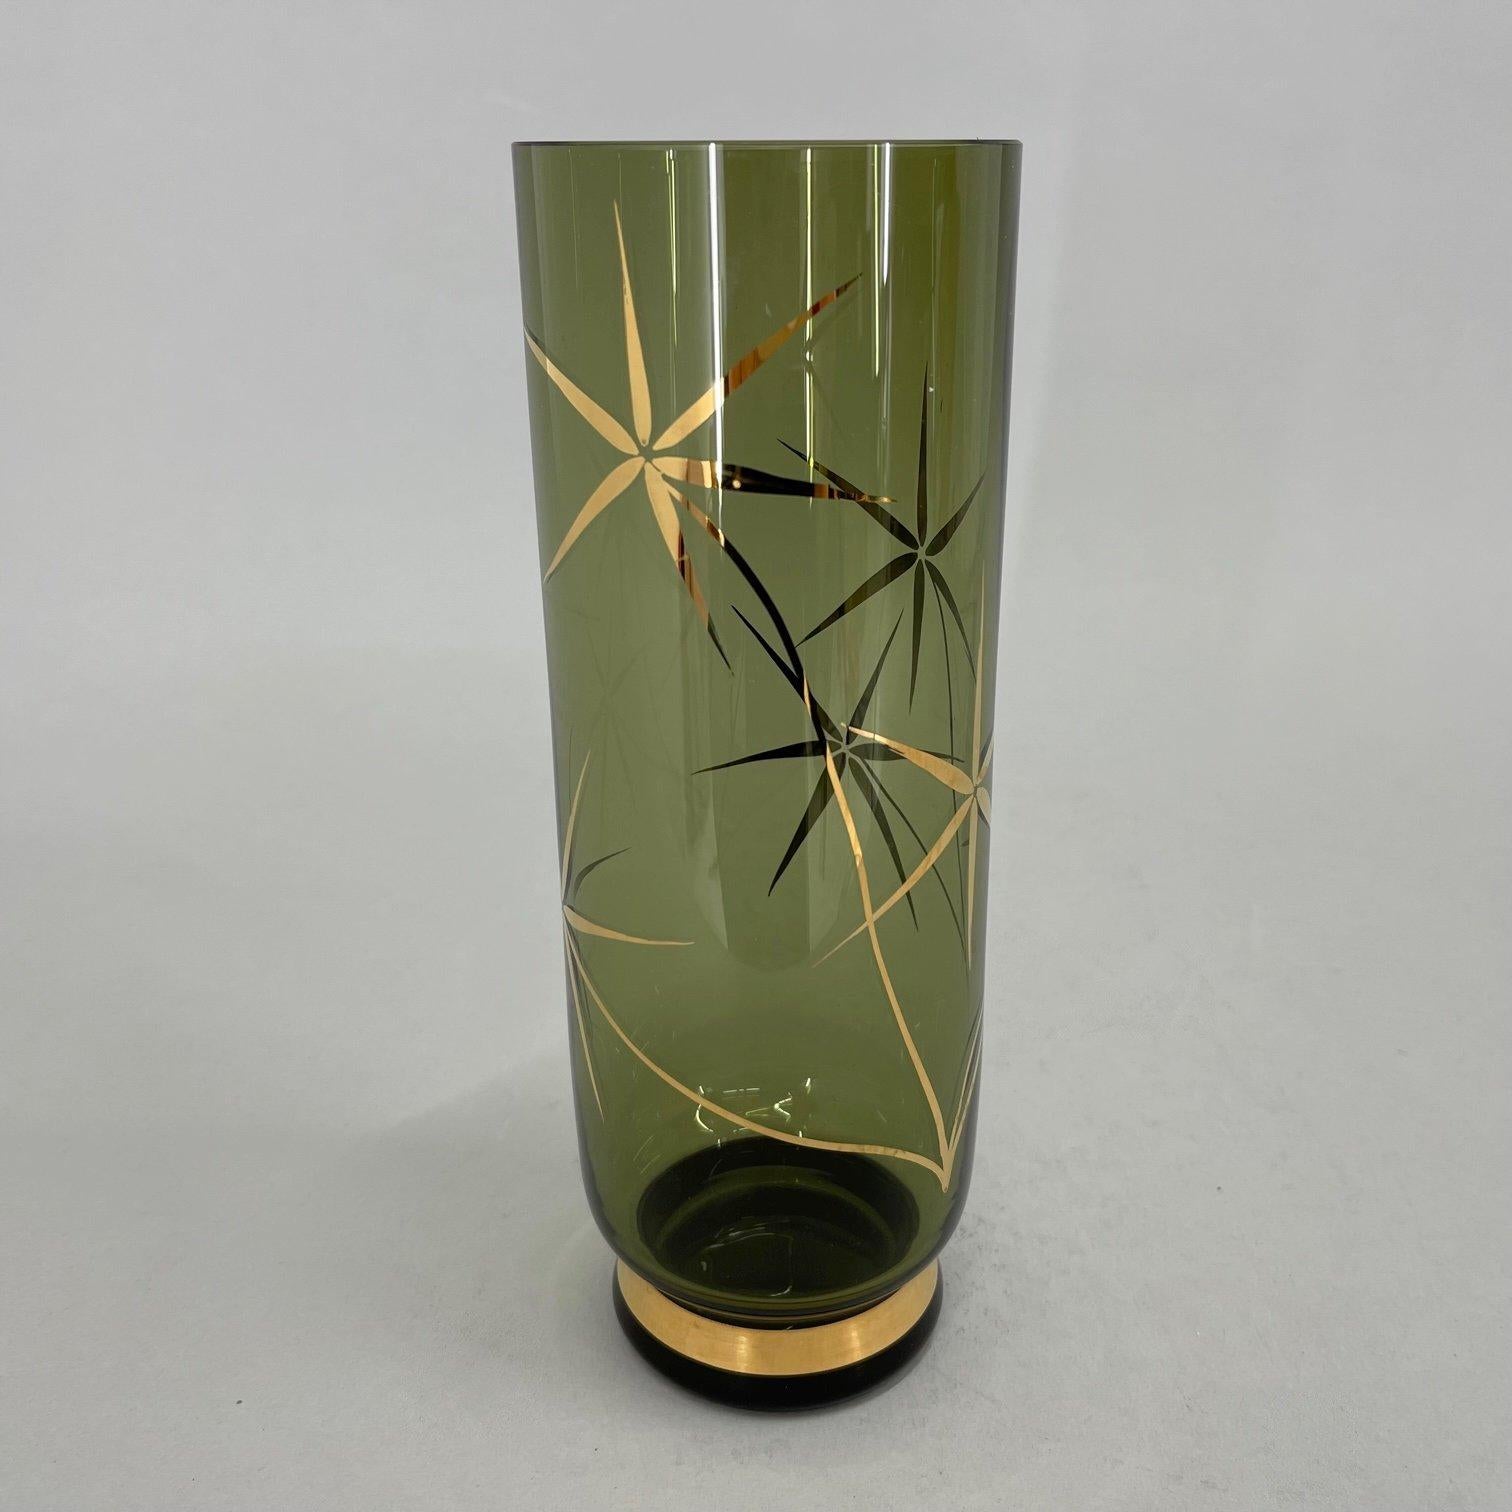 Vintage vase from former Czechoslovakia, produced in 1960's.